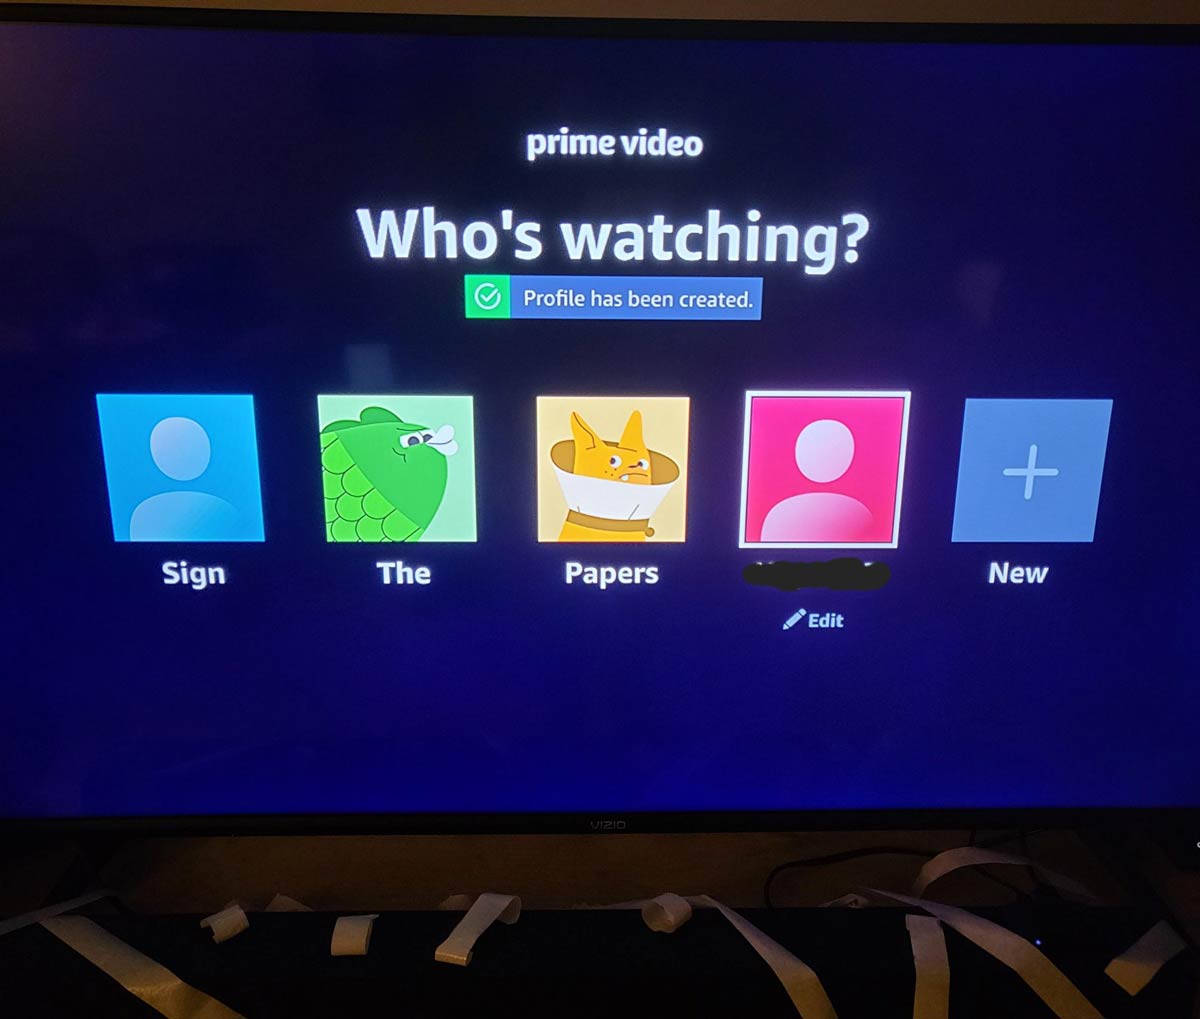 My buddy is going through a divorce and just found out his wife's family is still using his Amazon Video after a year of her not signing, so he did this